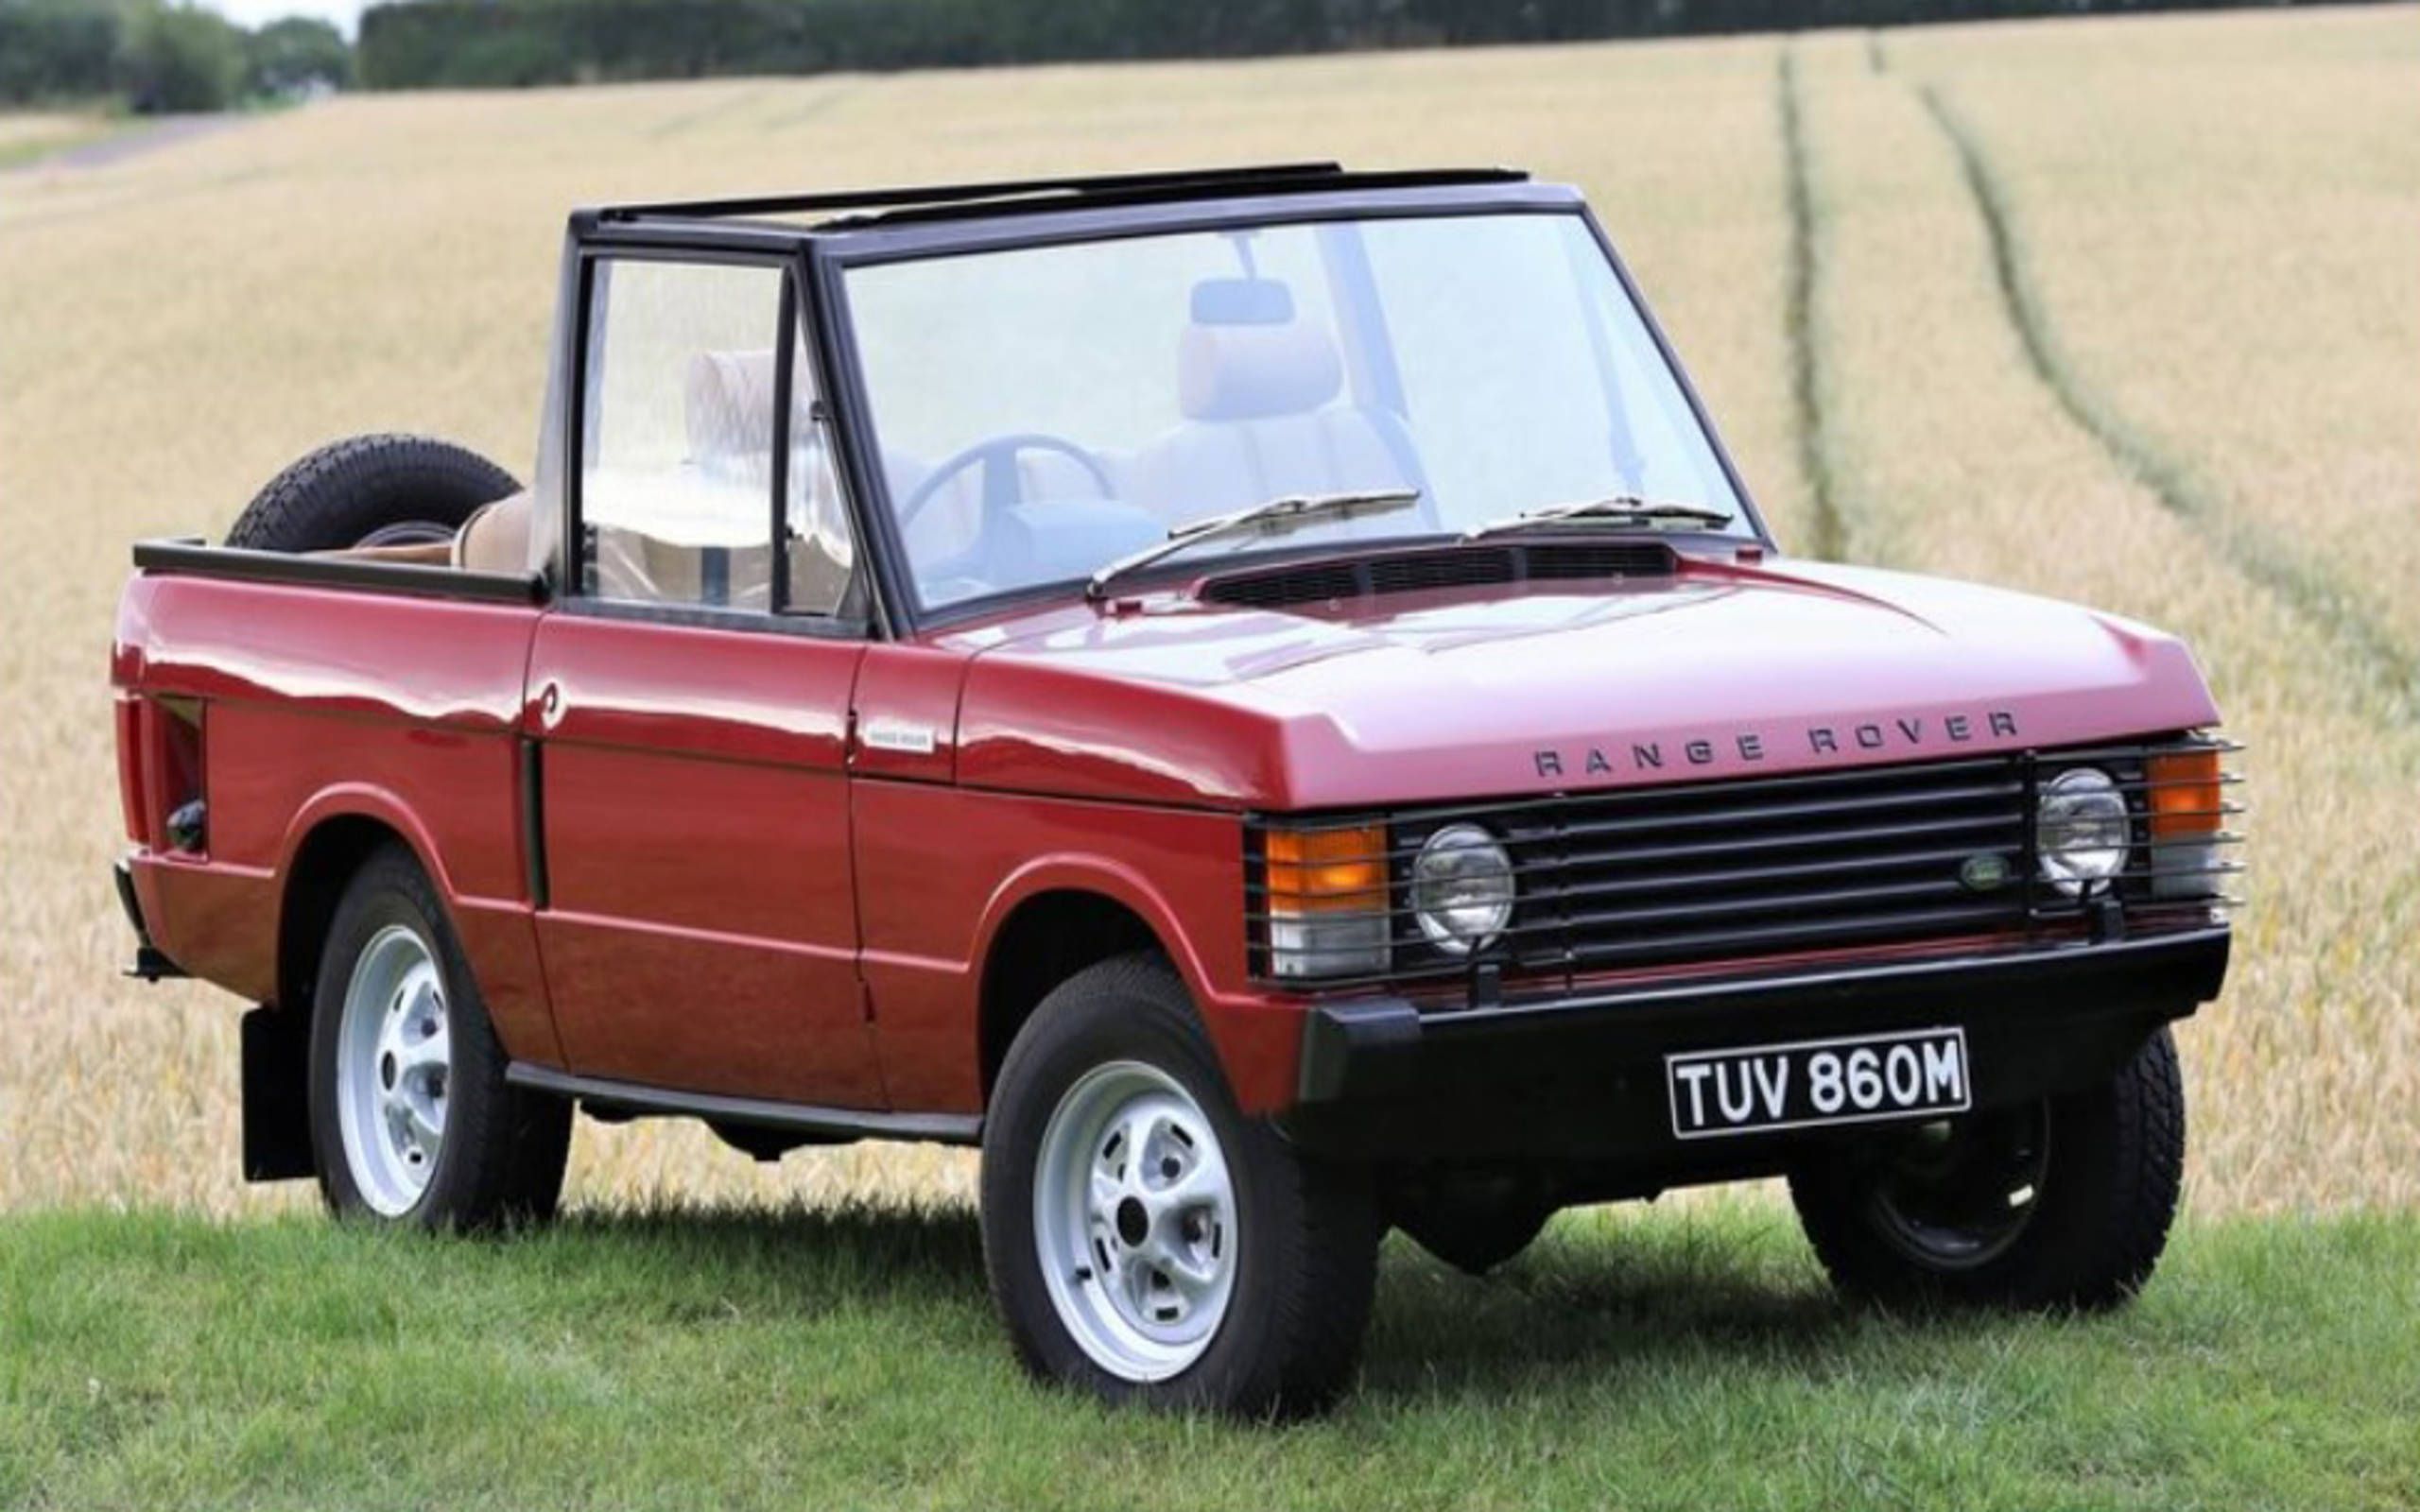 Bid on this rare Range Rover convertible before the Evoque gets here